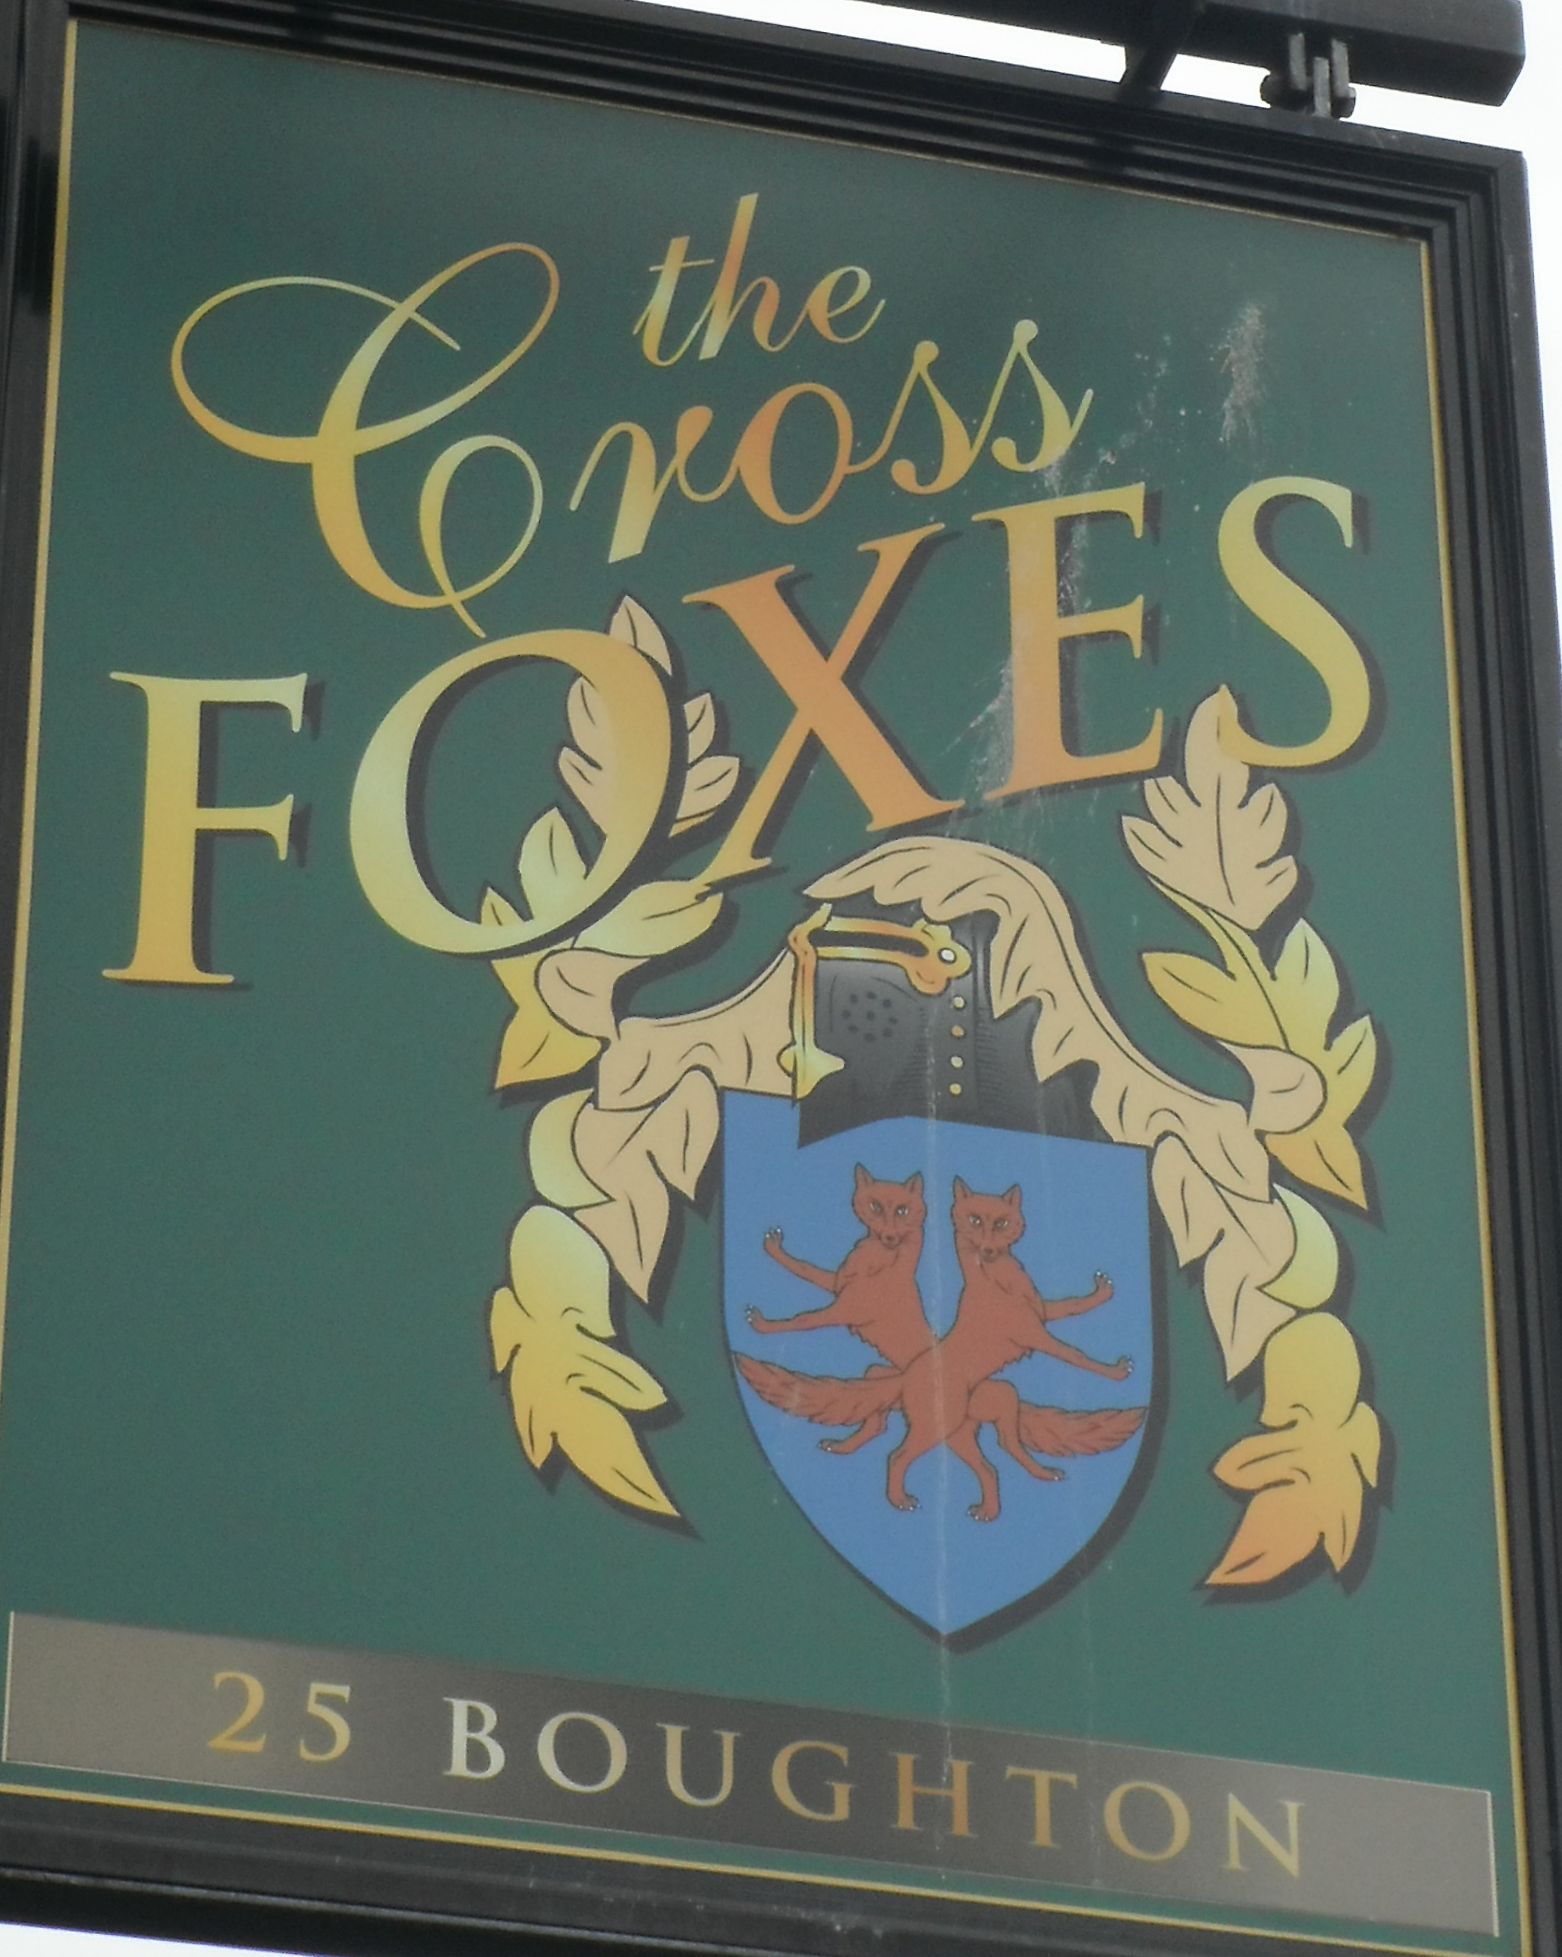 Photo taken by me – The Cross Foxes pub sign, Boughton, Chester  